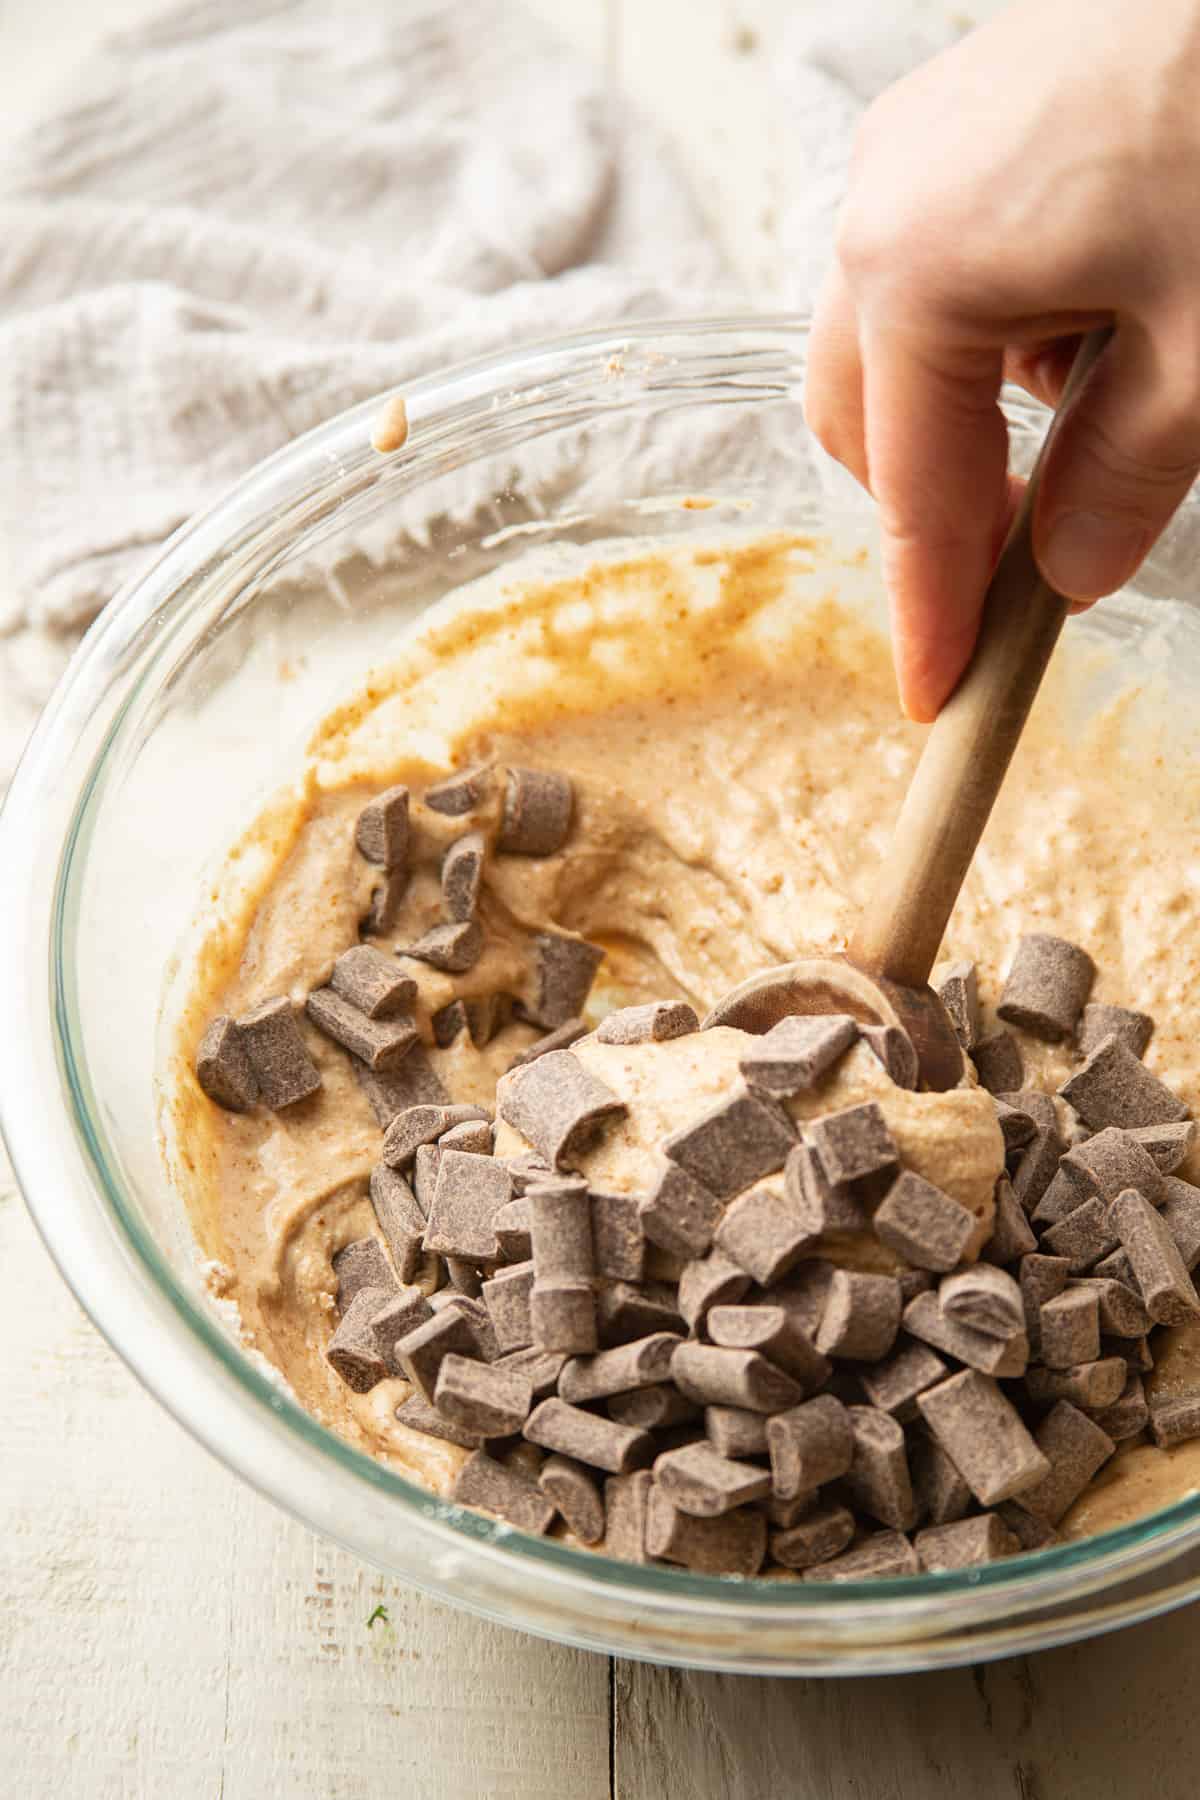 Hand stirring chocolate chips into muffin batter.